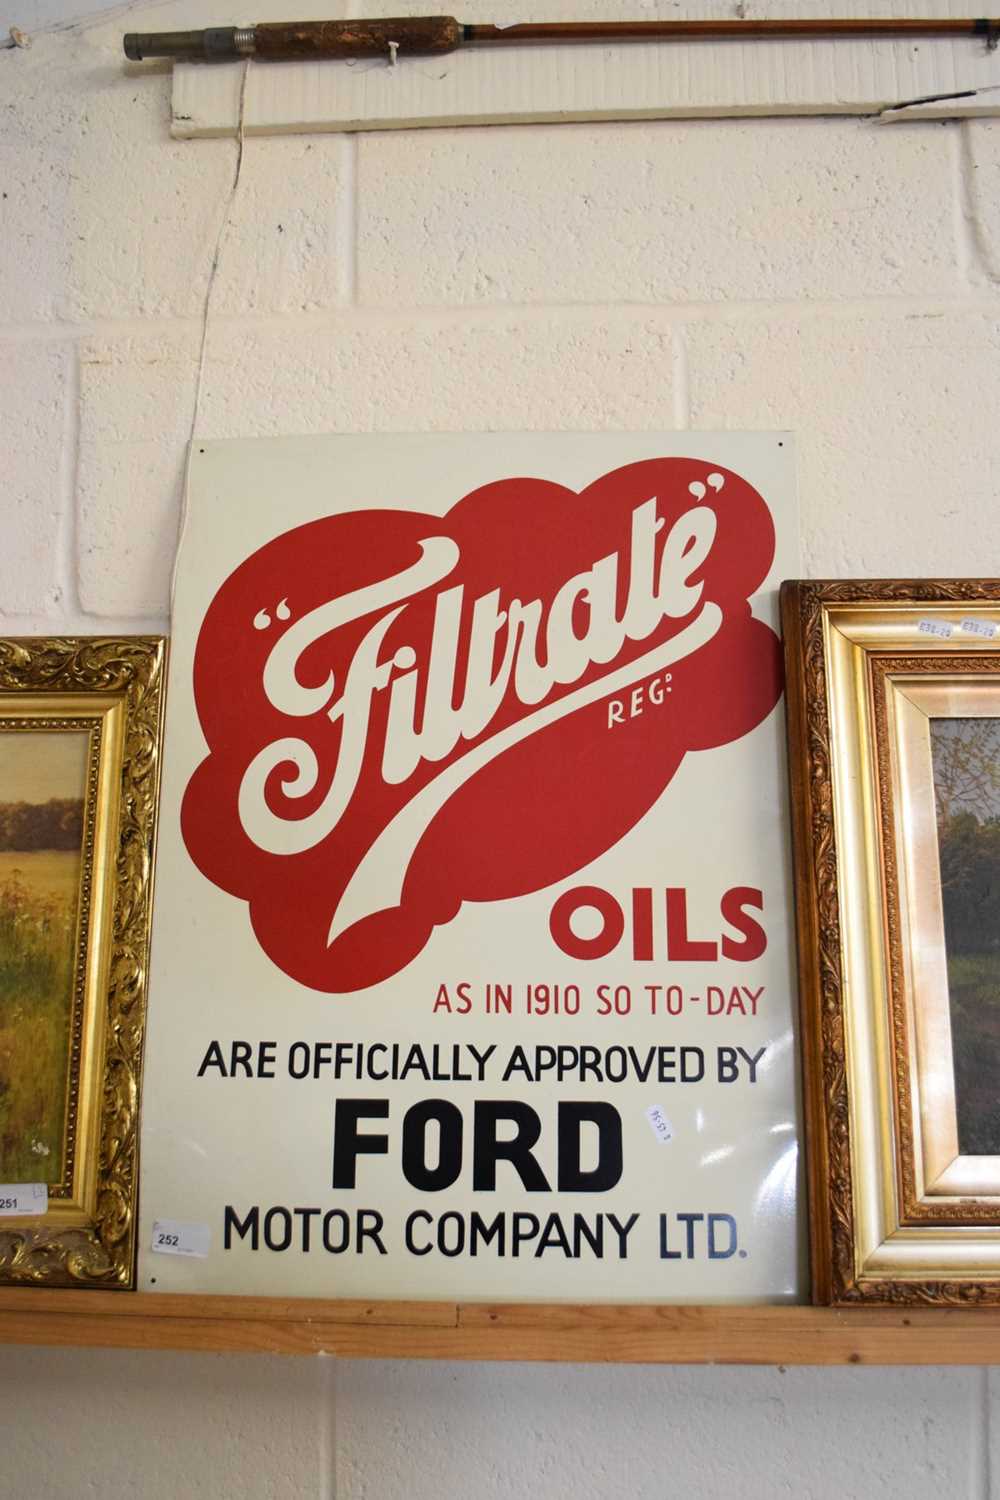 MODERN METAL ADVERTISING SIGN MARKED 'FILTRATE OILS'